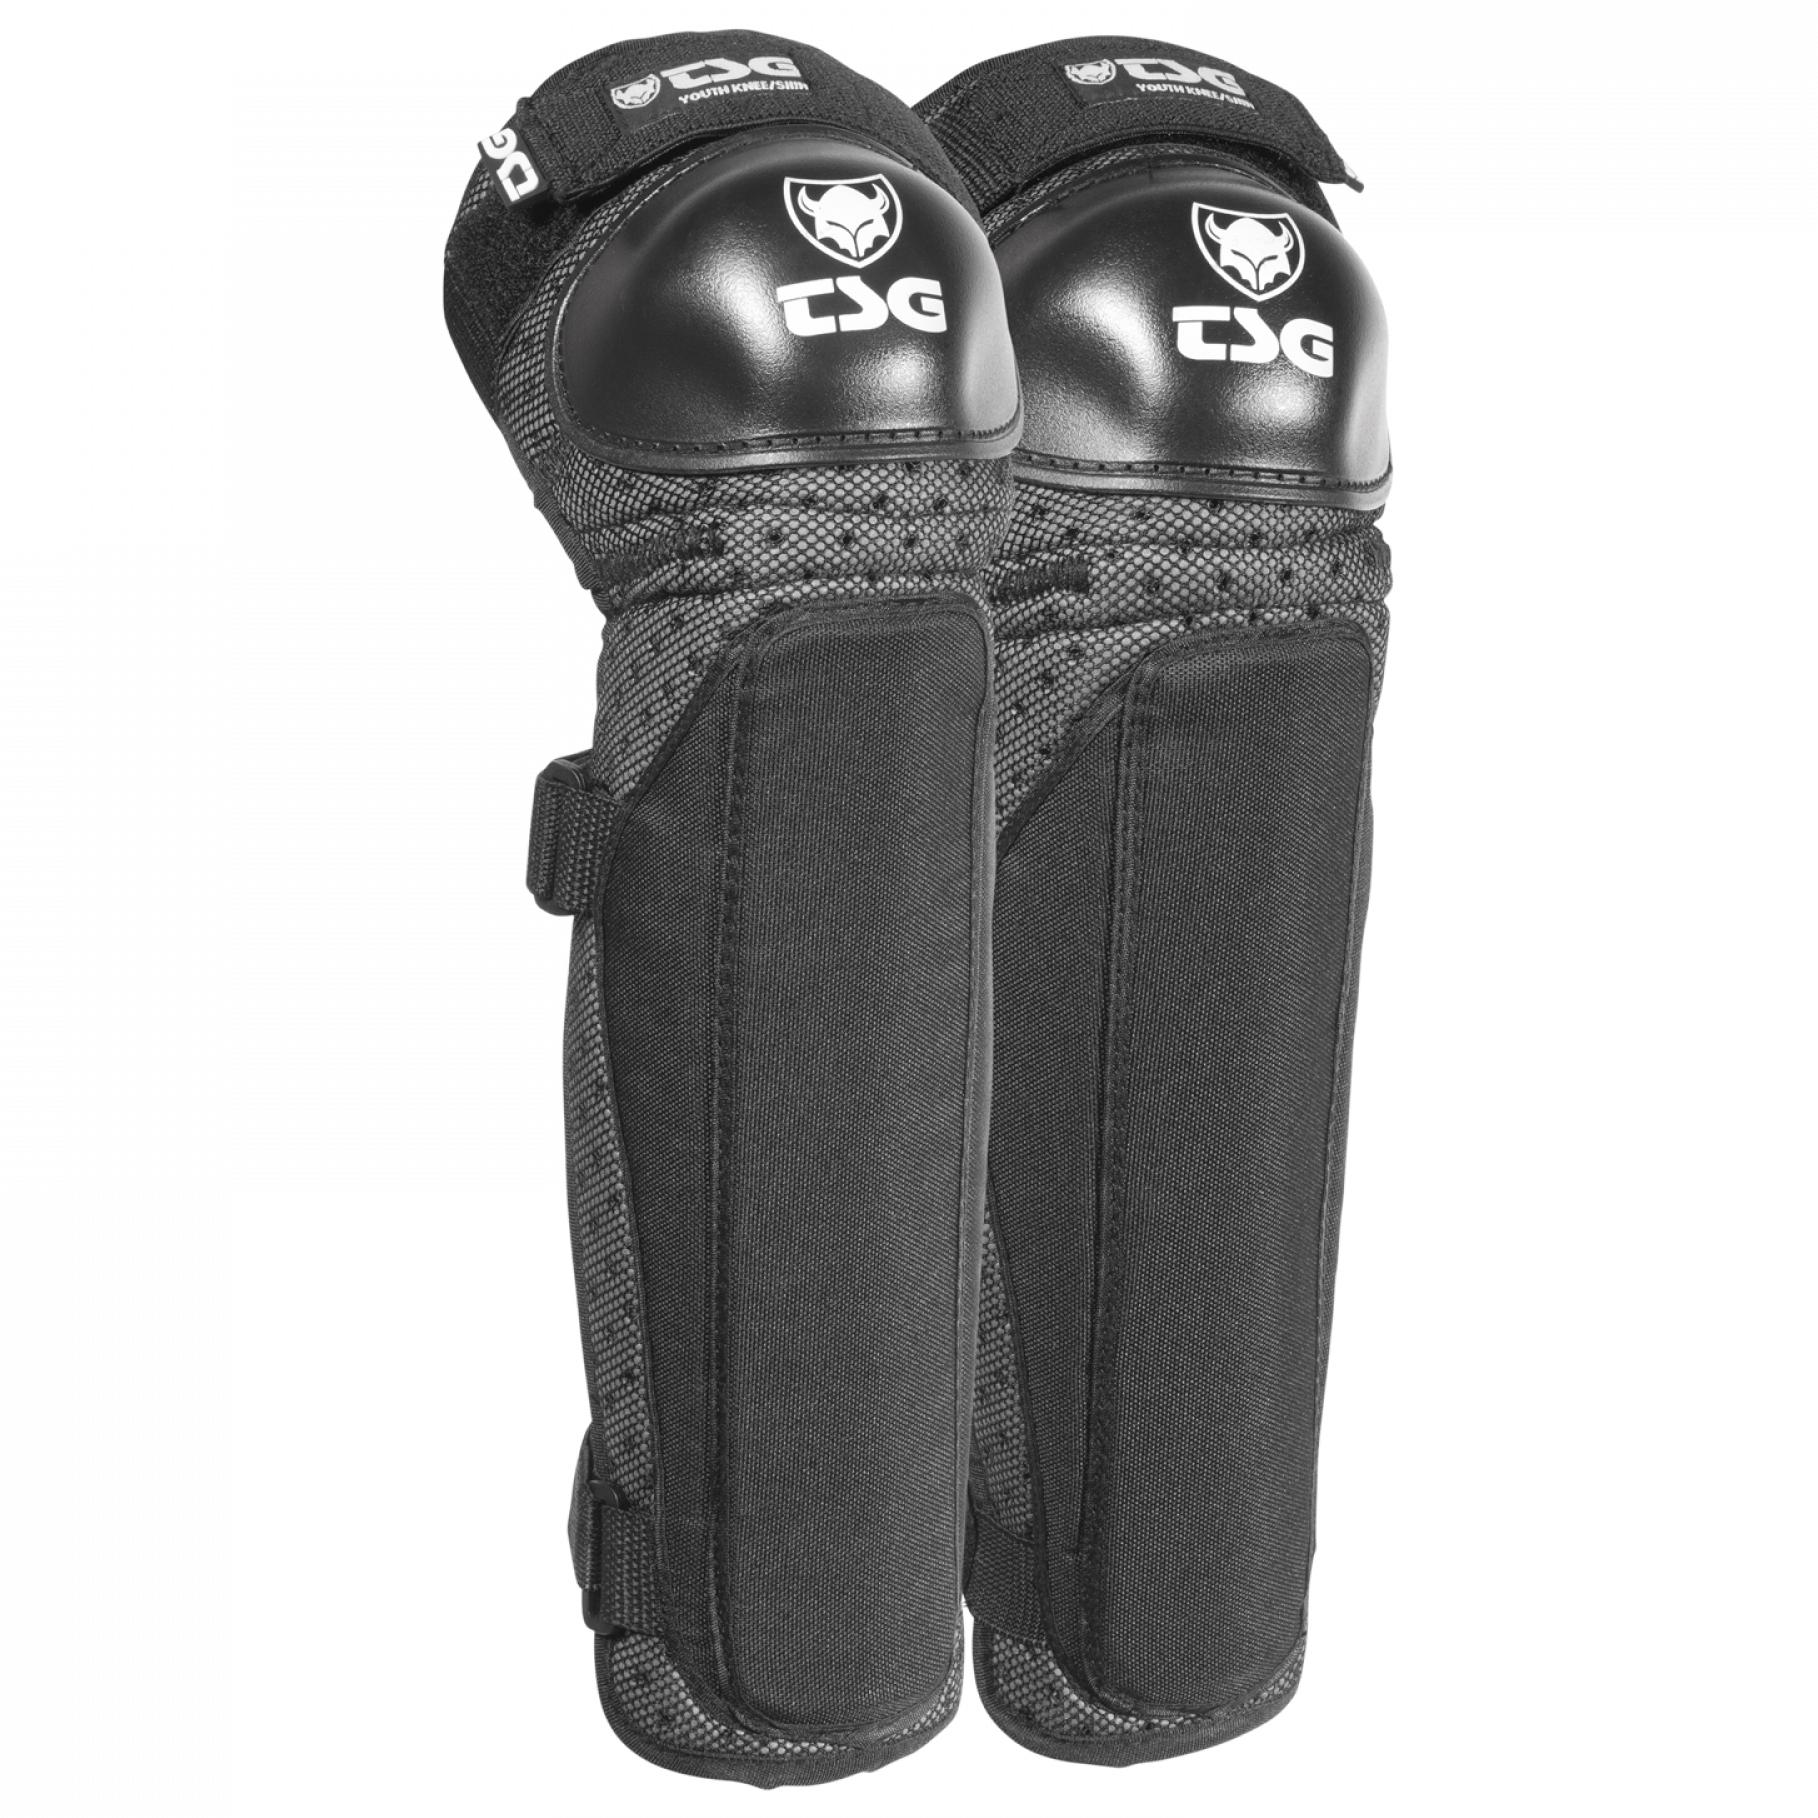 TSG Youth Knee/Shin Pads Guards Protection Black XS